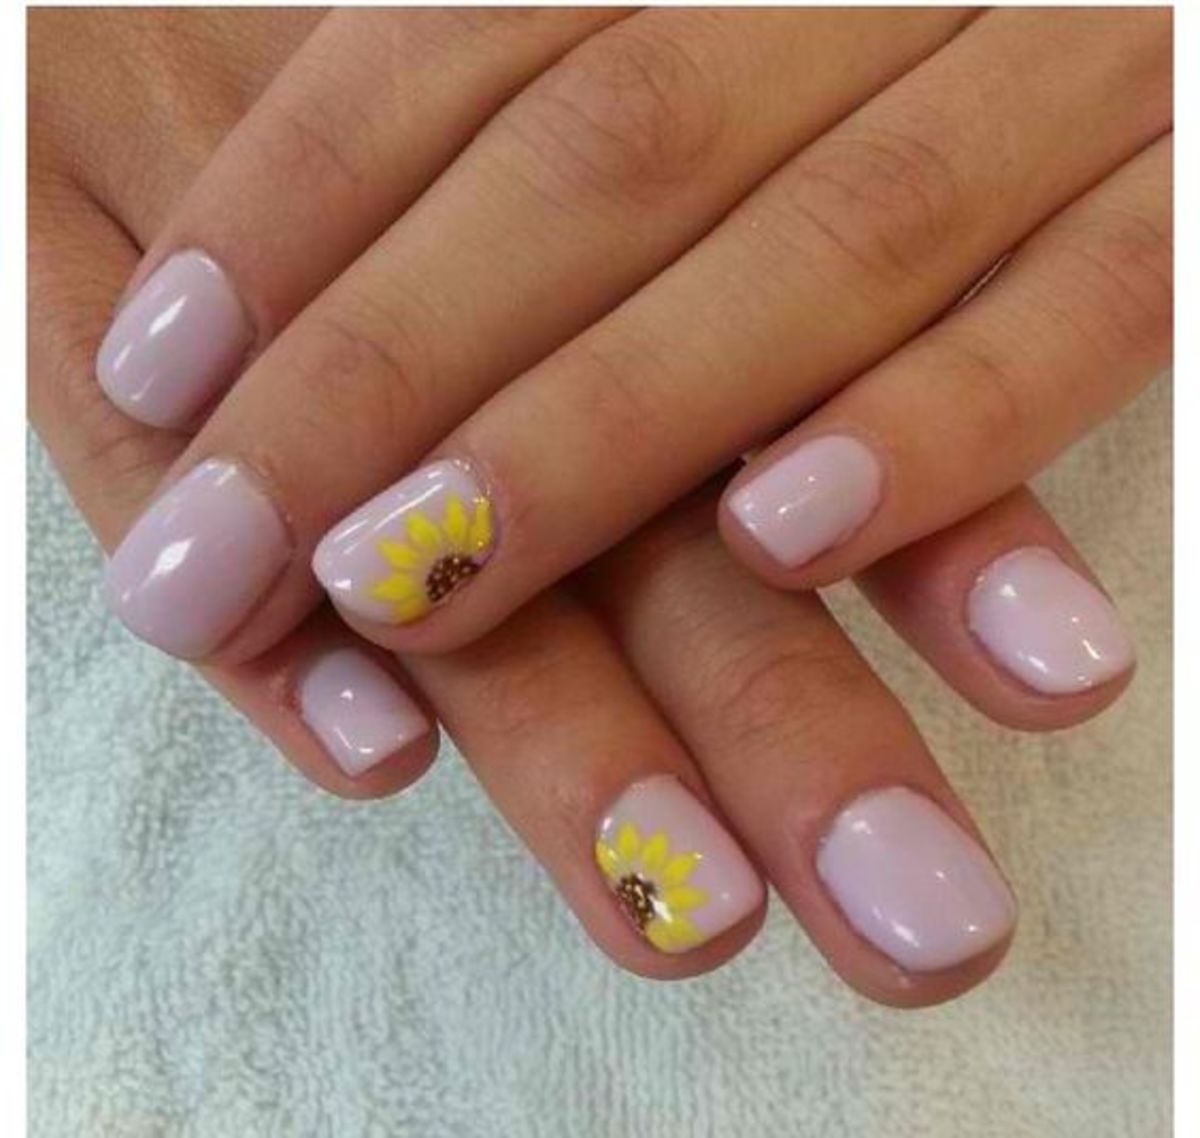 19 Nail Tip Designs That Go Beyond the Classic French